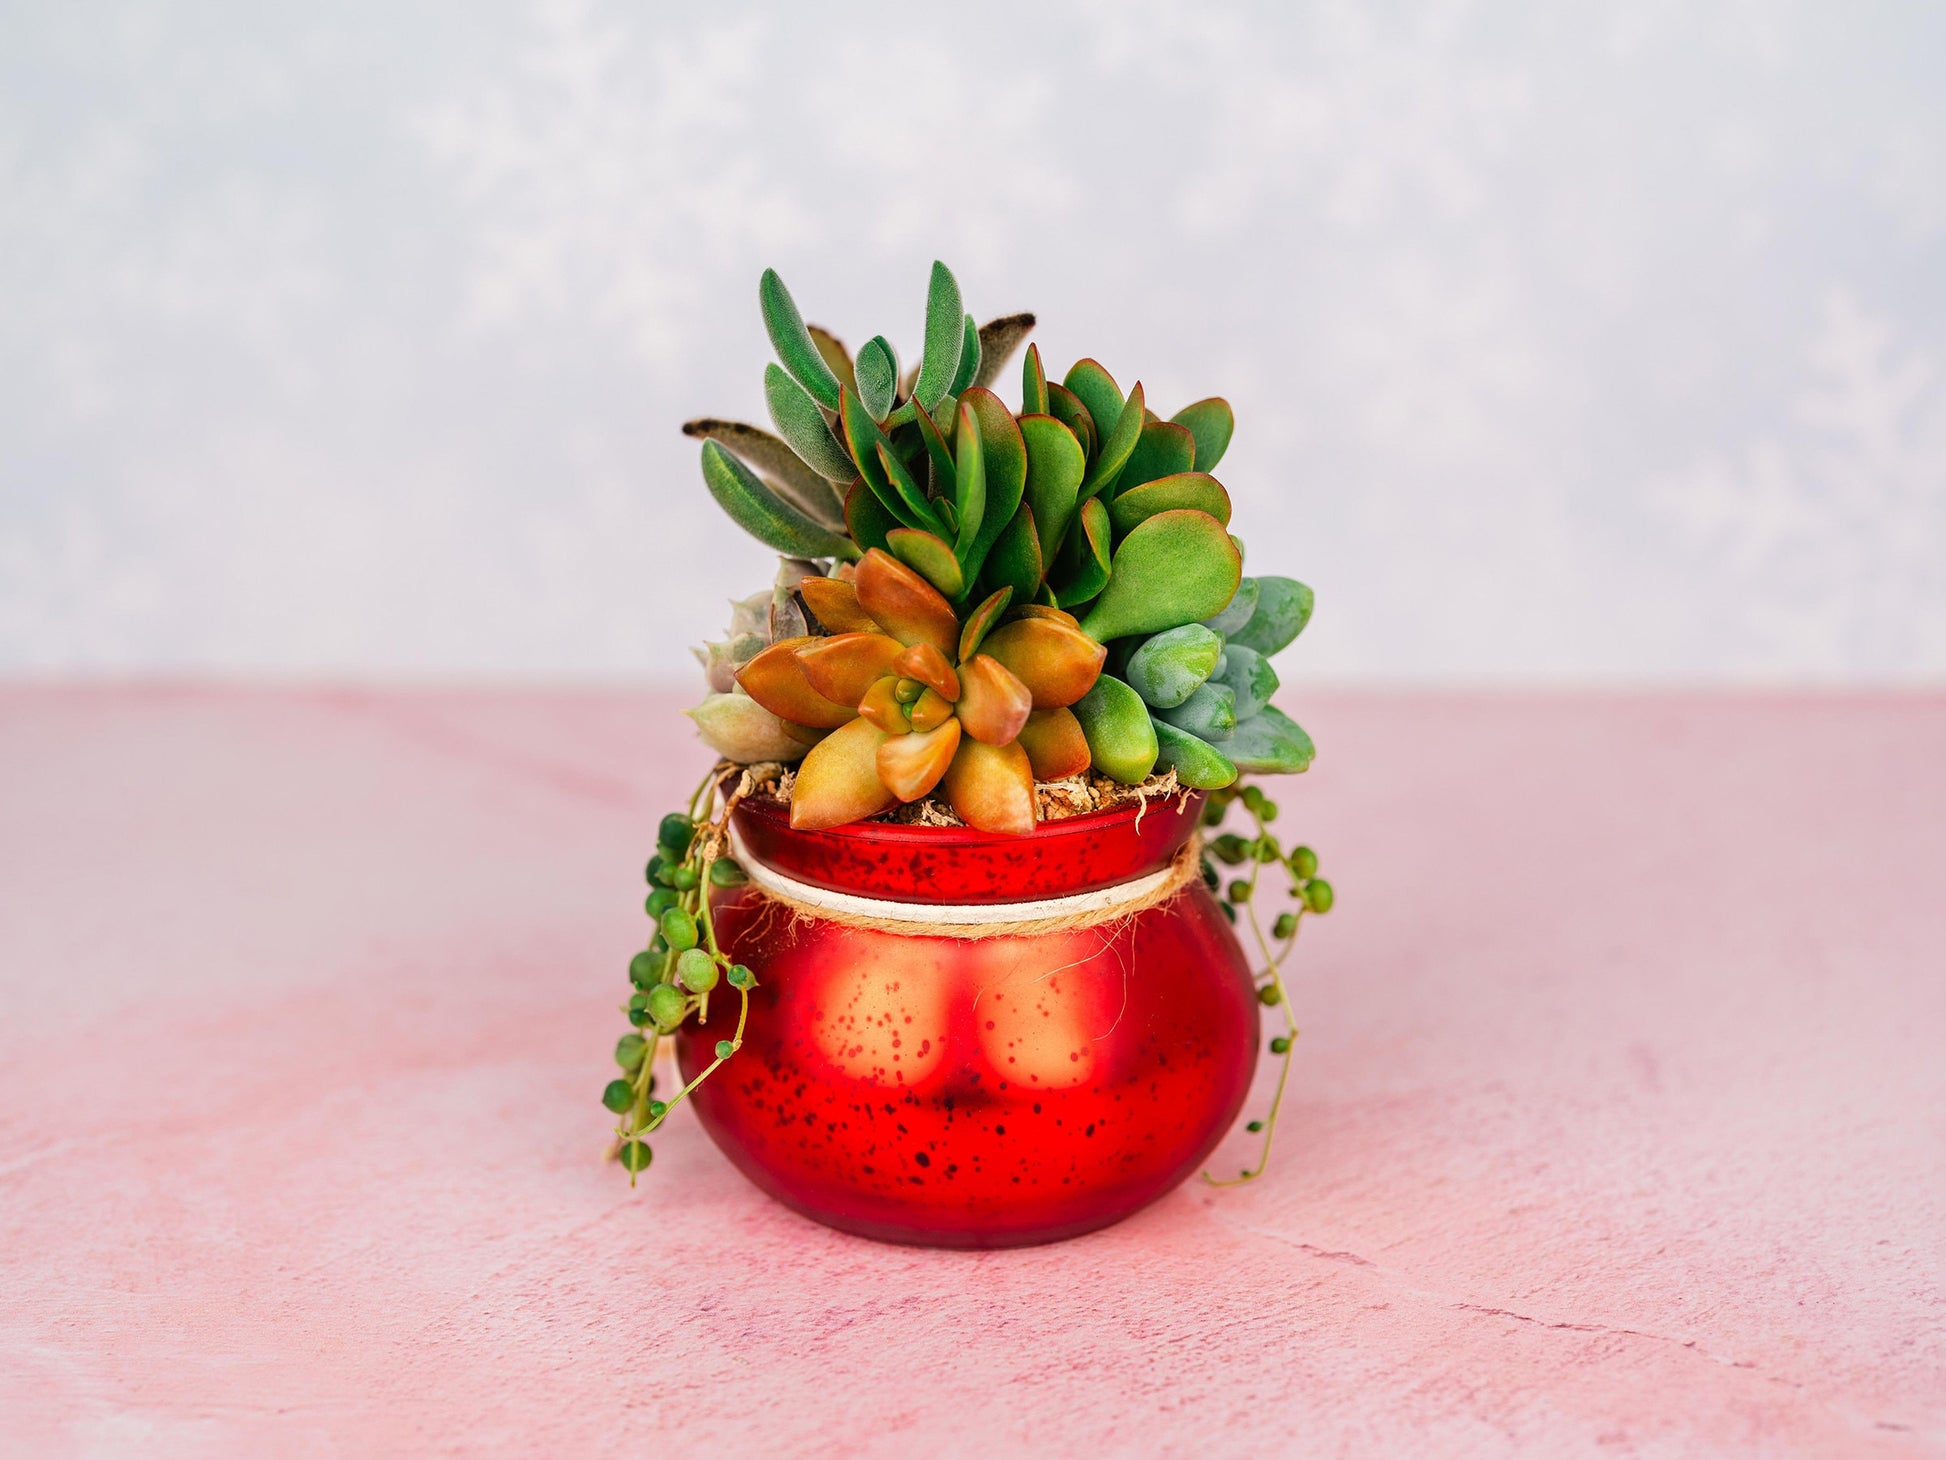 Red Mercury Glass Christmas Succulent Gift Arrangement with Rustic Wood Star- Small Gift or Holiday Decor Centerpiece